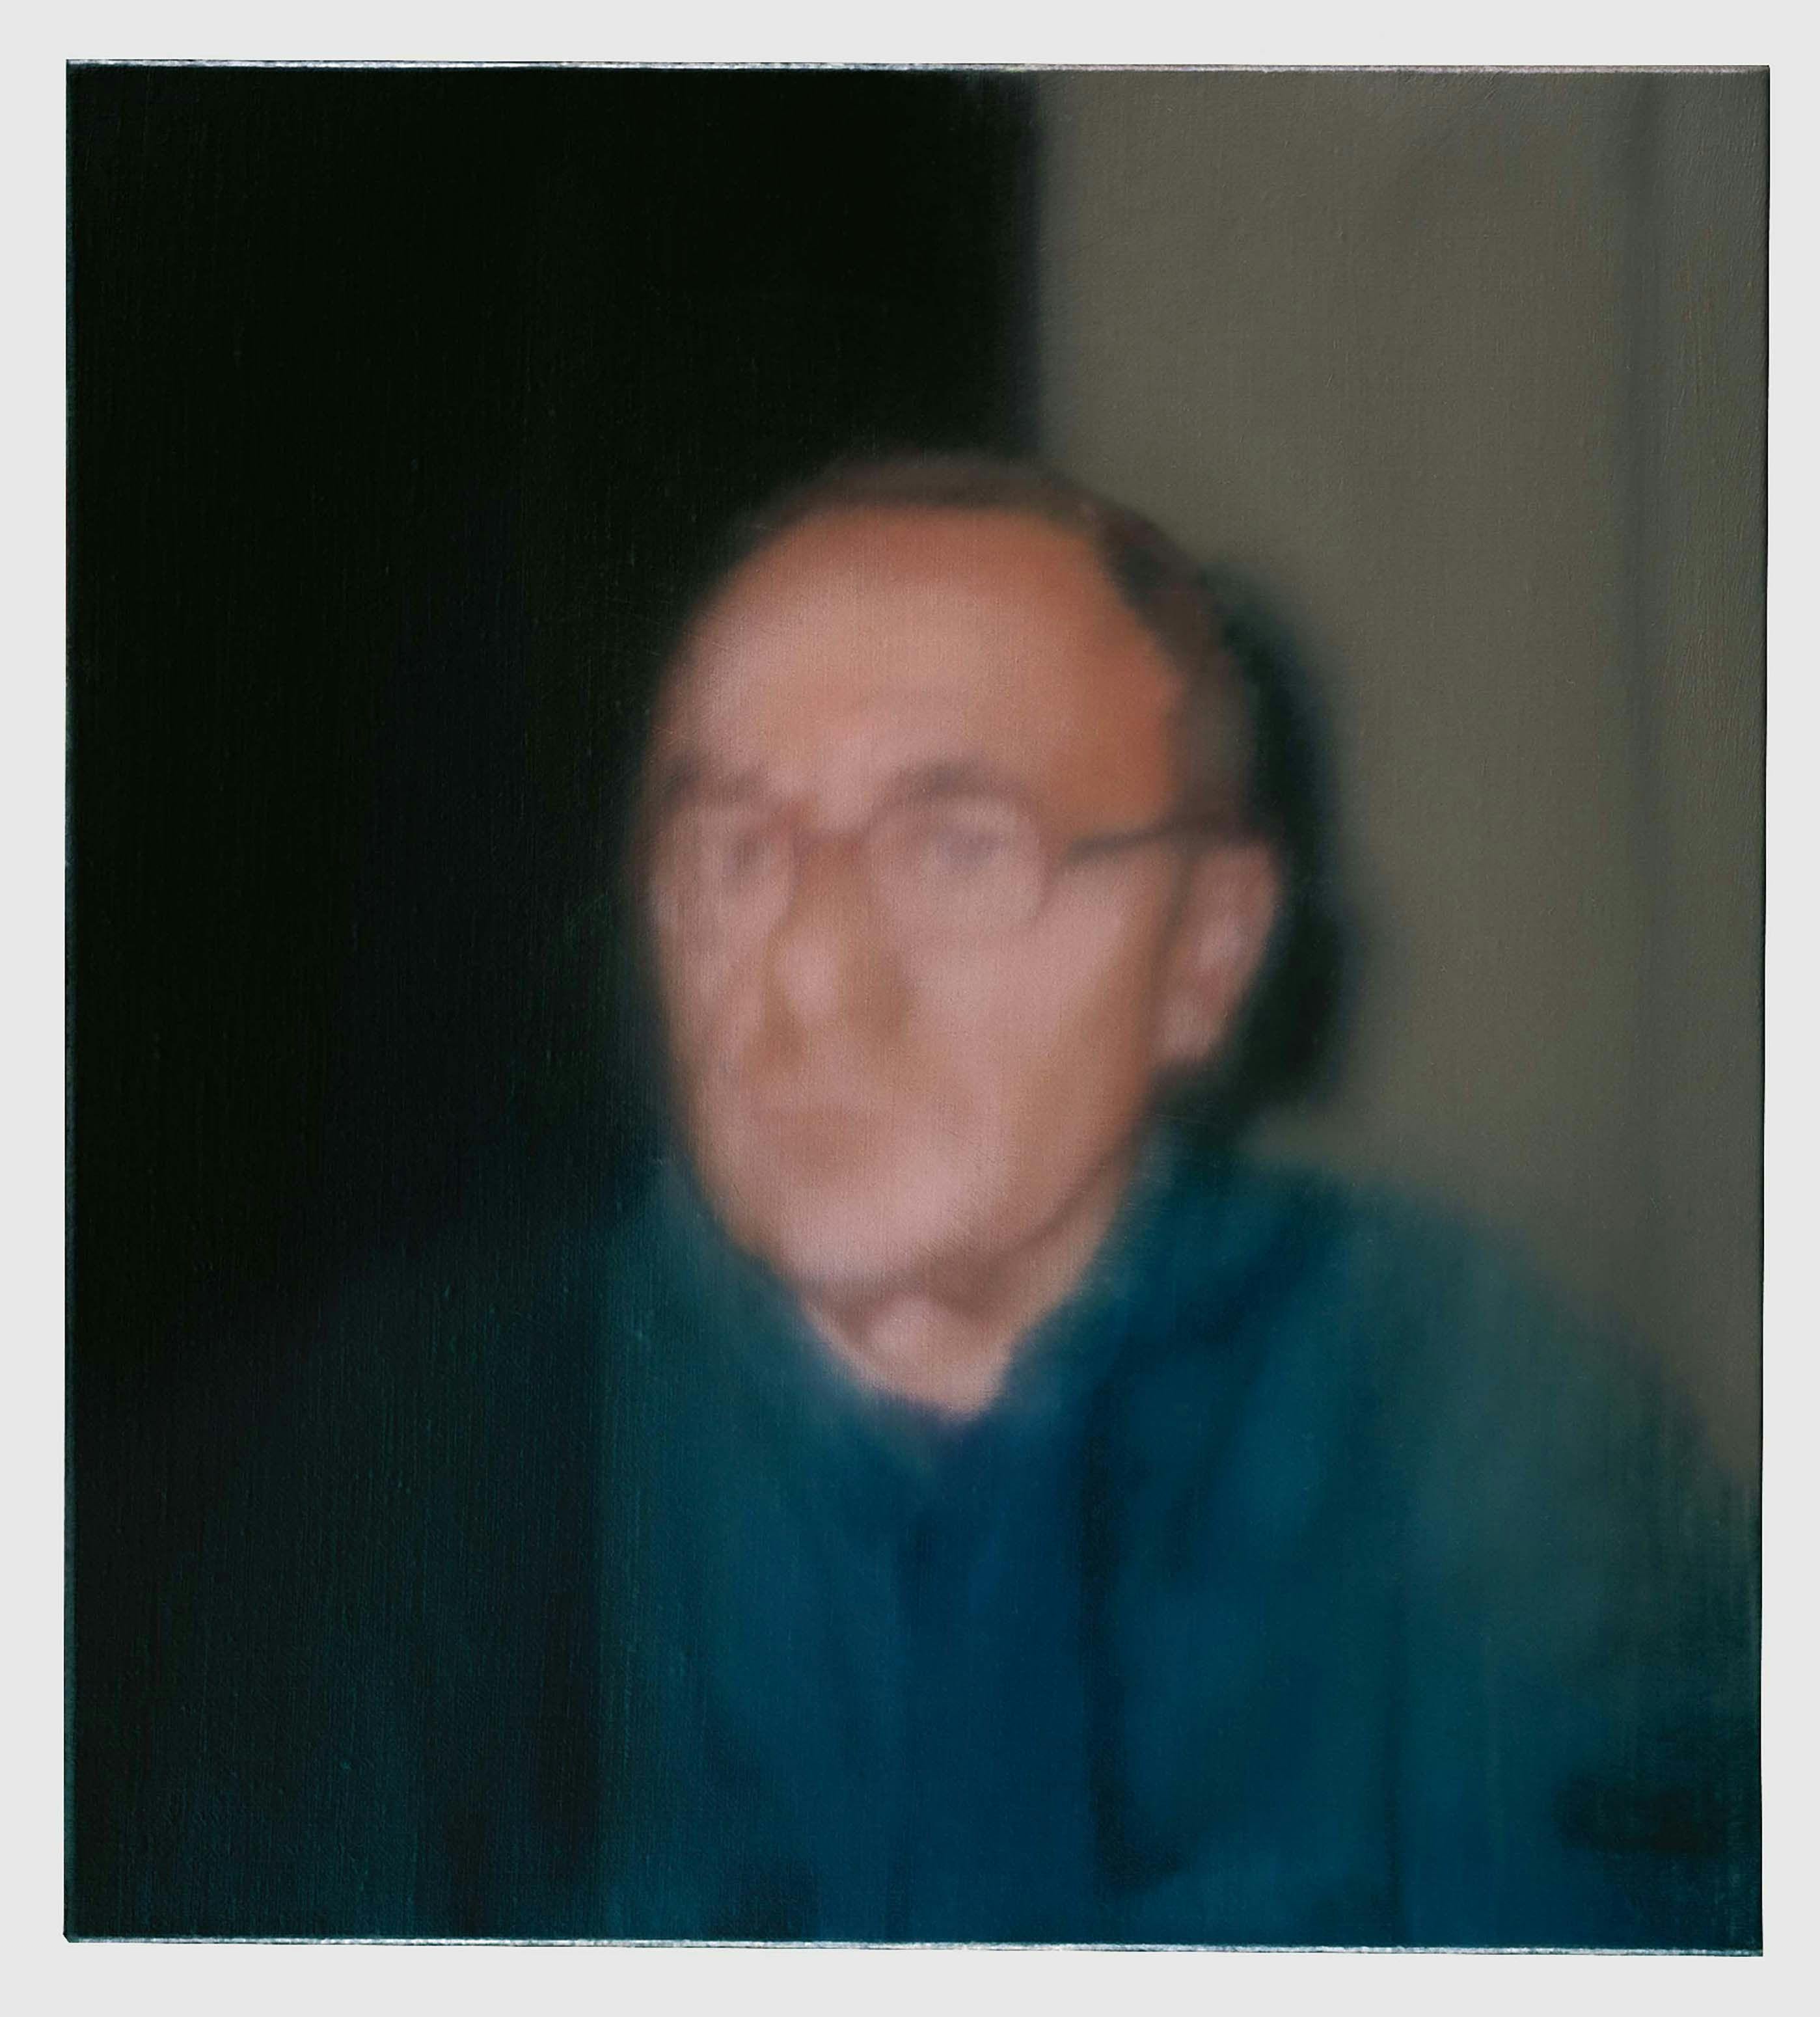 A painting by Gerhard Richter, titled Selbstportrait (Self-portrait), dated 1996.